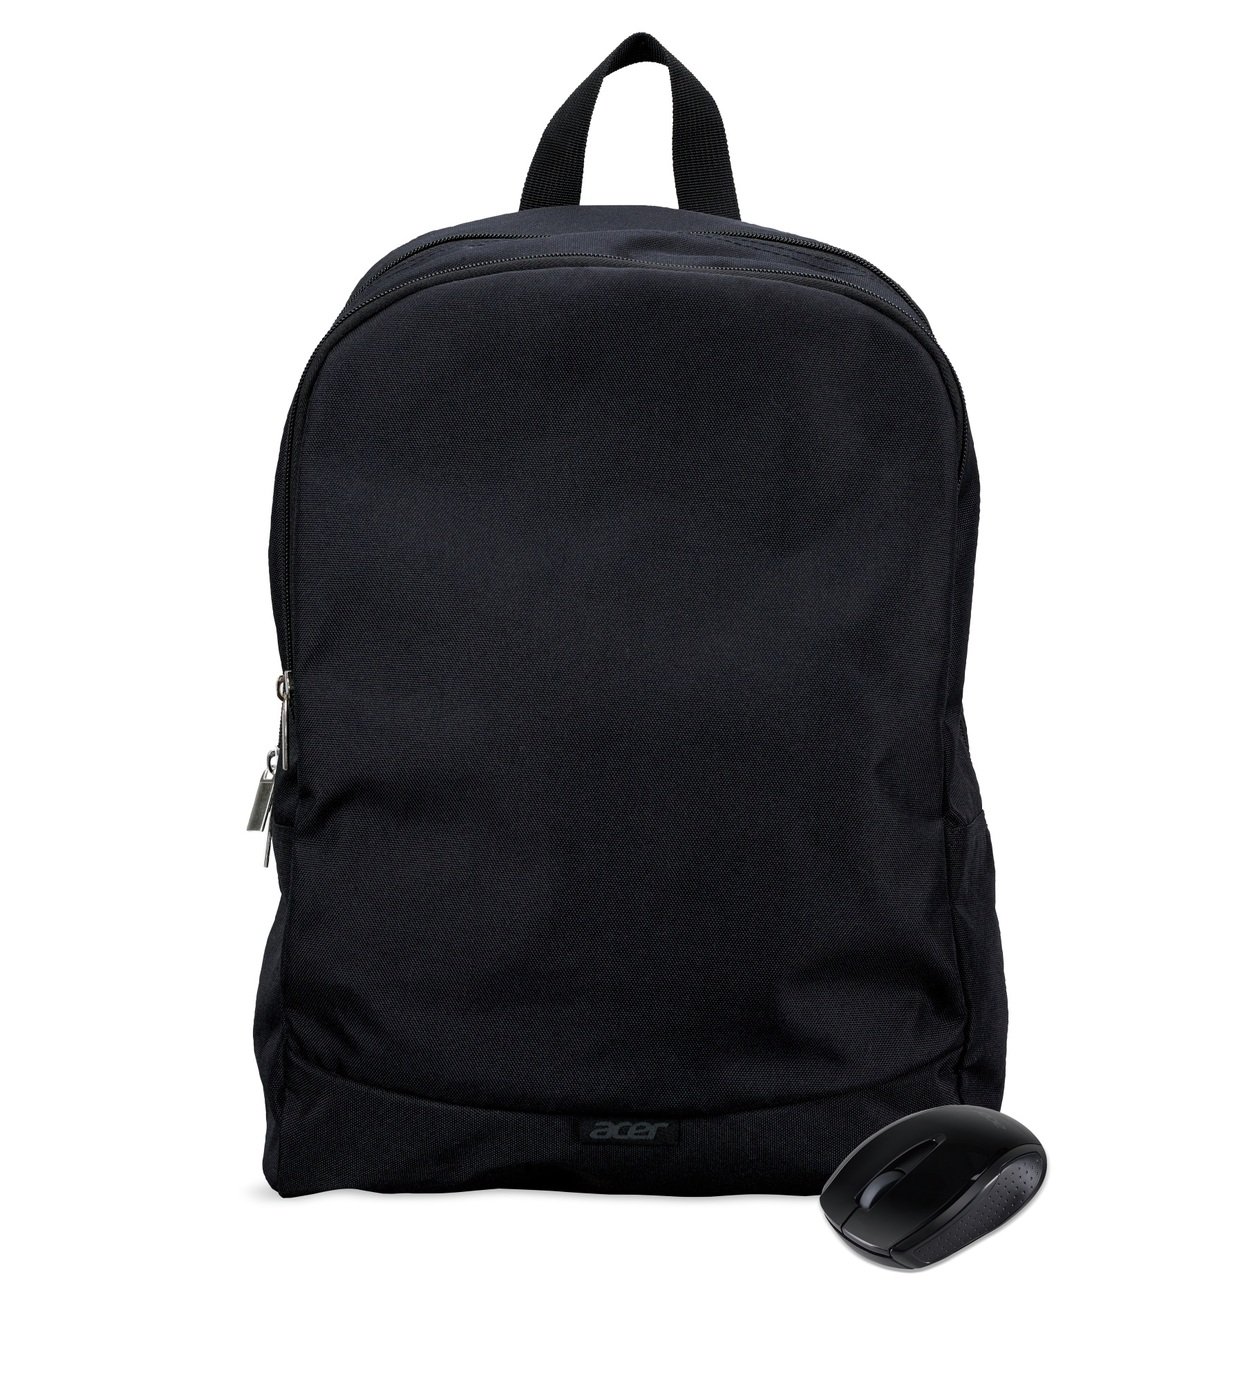 Acer 15.6 Inch Laptop Backpack and Wireless Mouse - Black